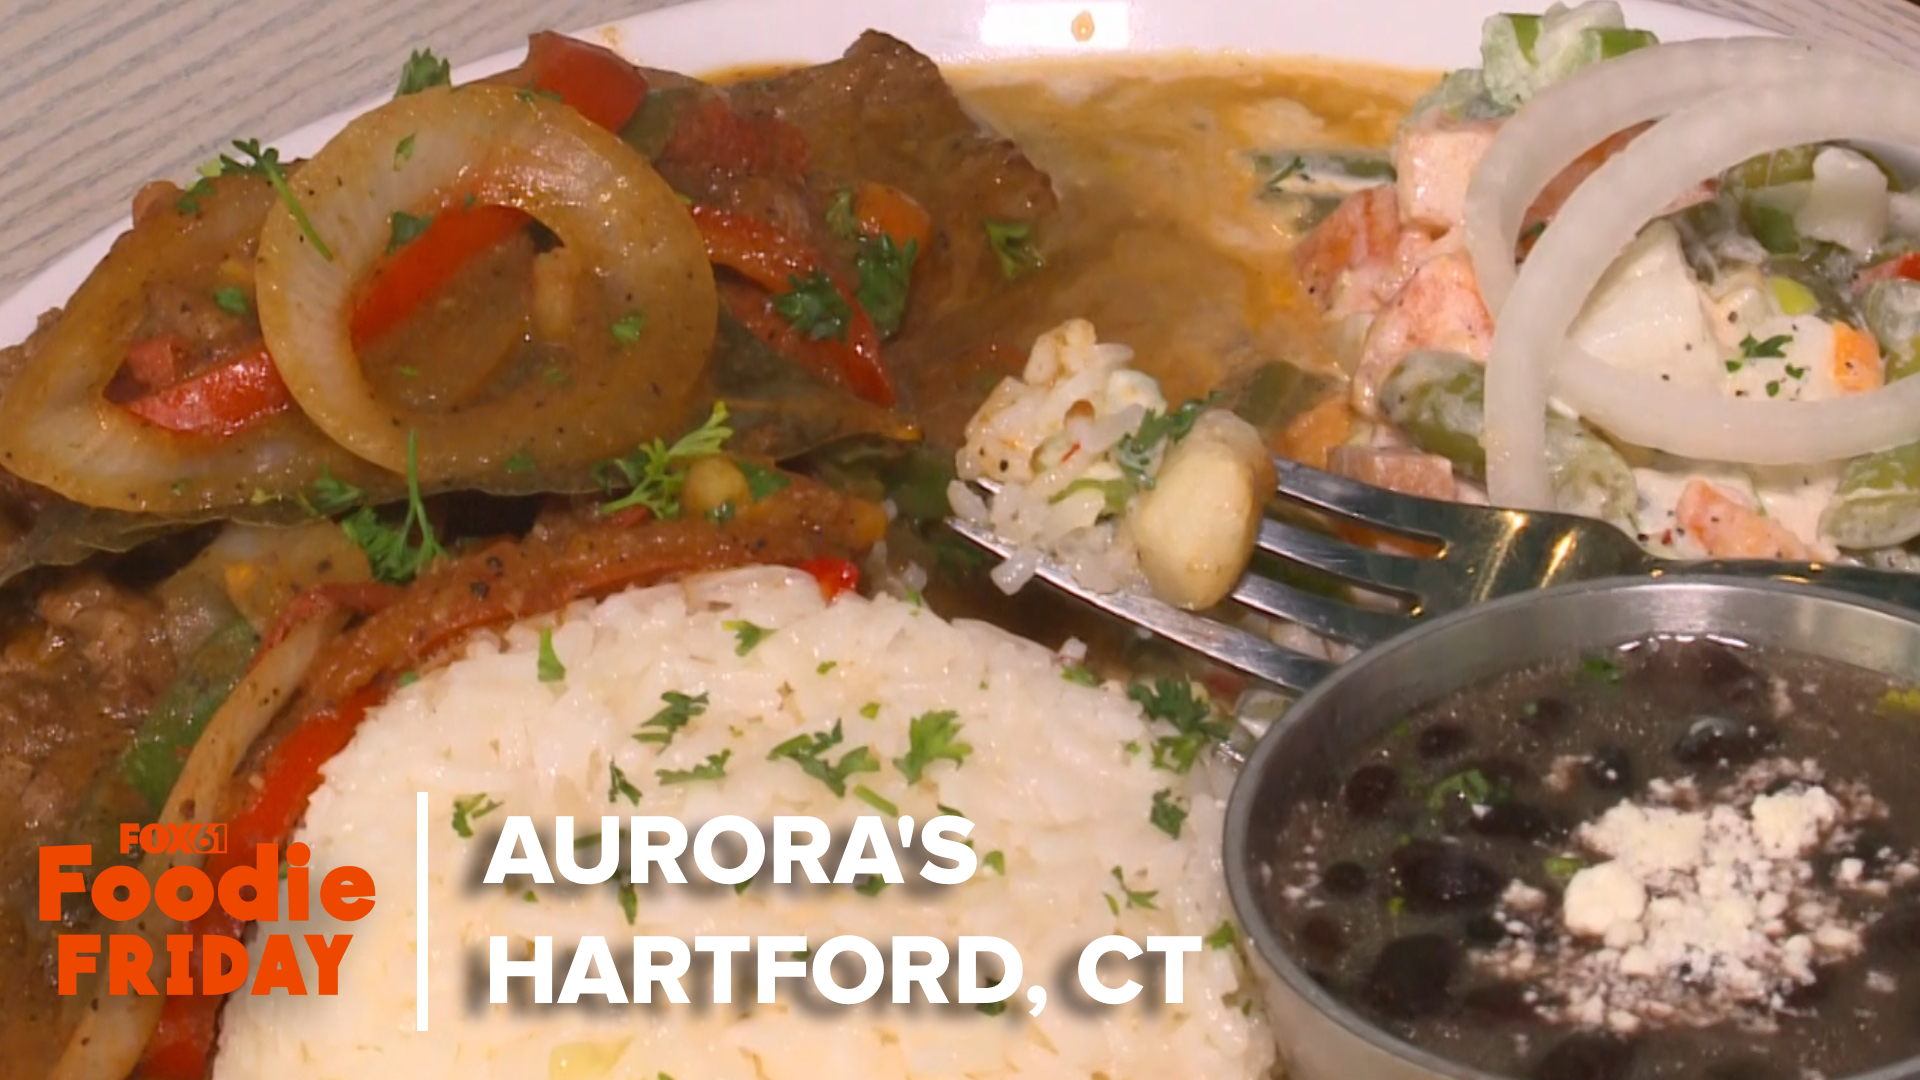 FOX61's Matt Scott visited Aurora's Restaurant on Capitol Avenue in Hartford, a family-operated restaurant that offers Guatemalan meals and treats.